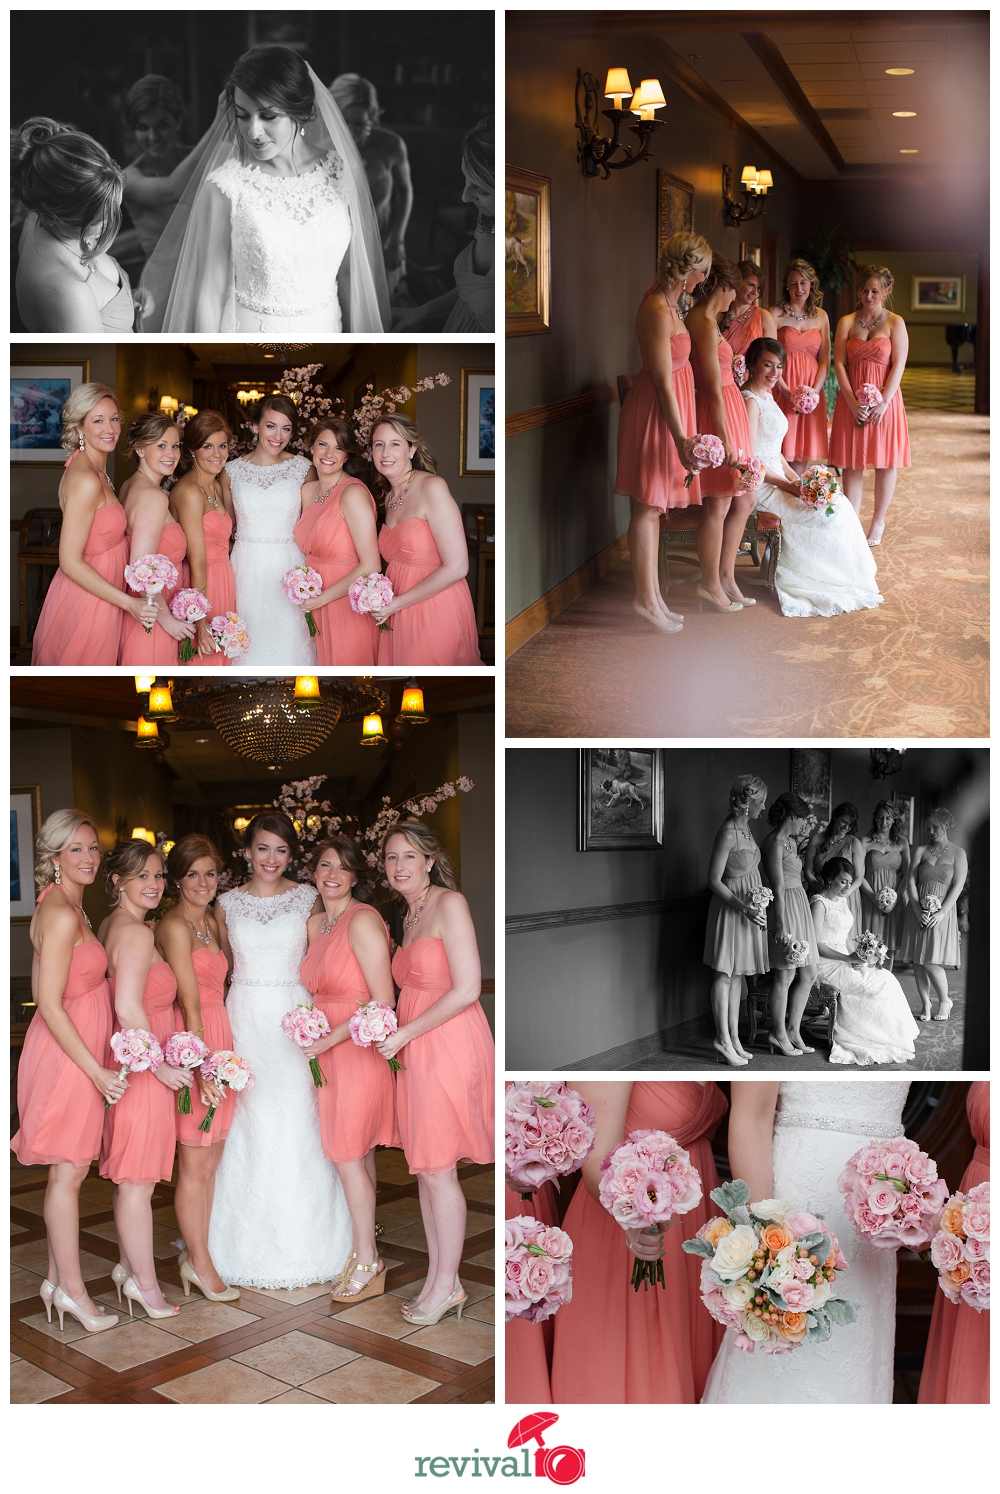 Photography by Revival Photography Weddings at Rock Barn Conover NC Photo